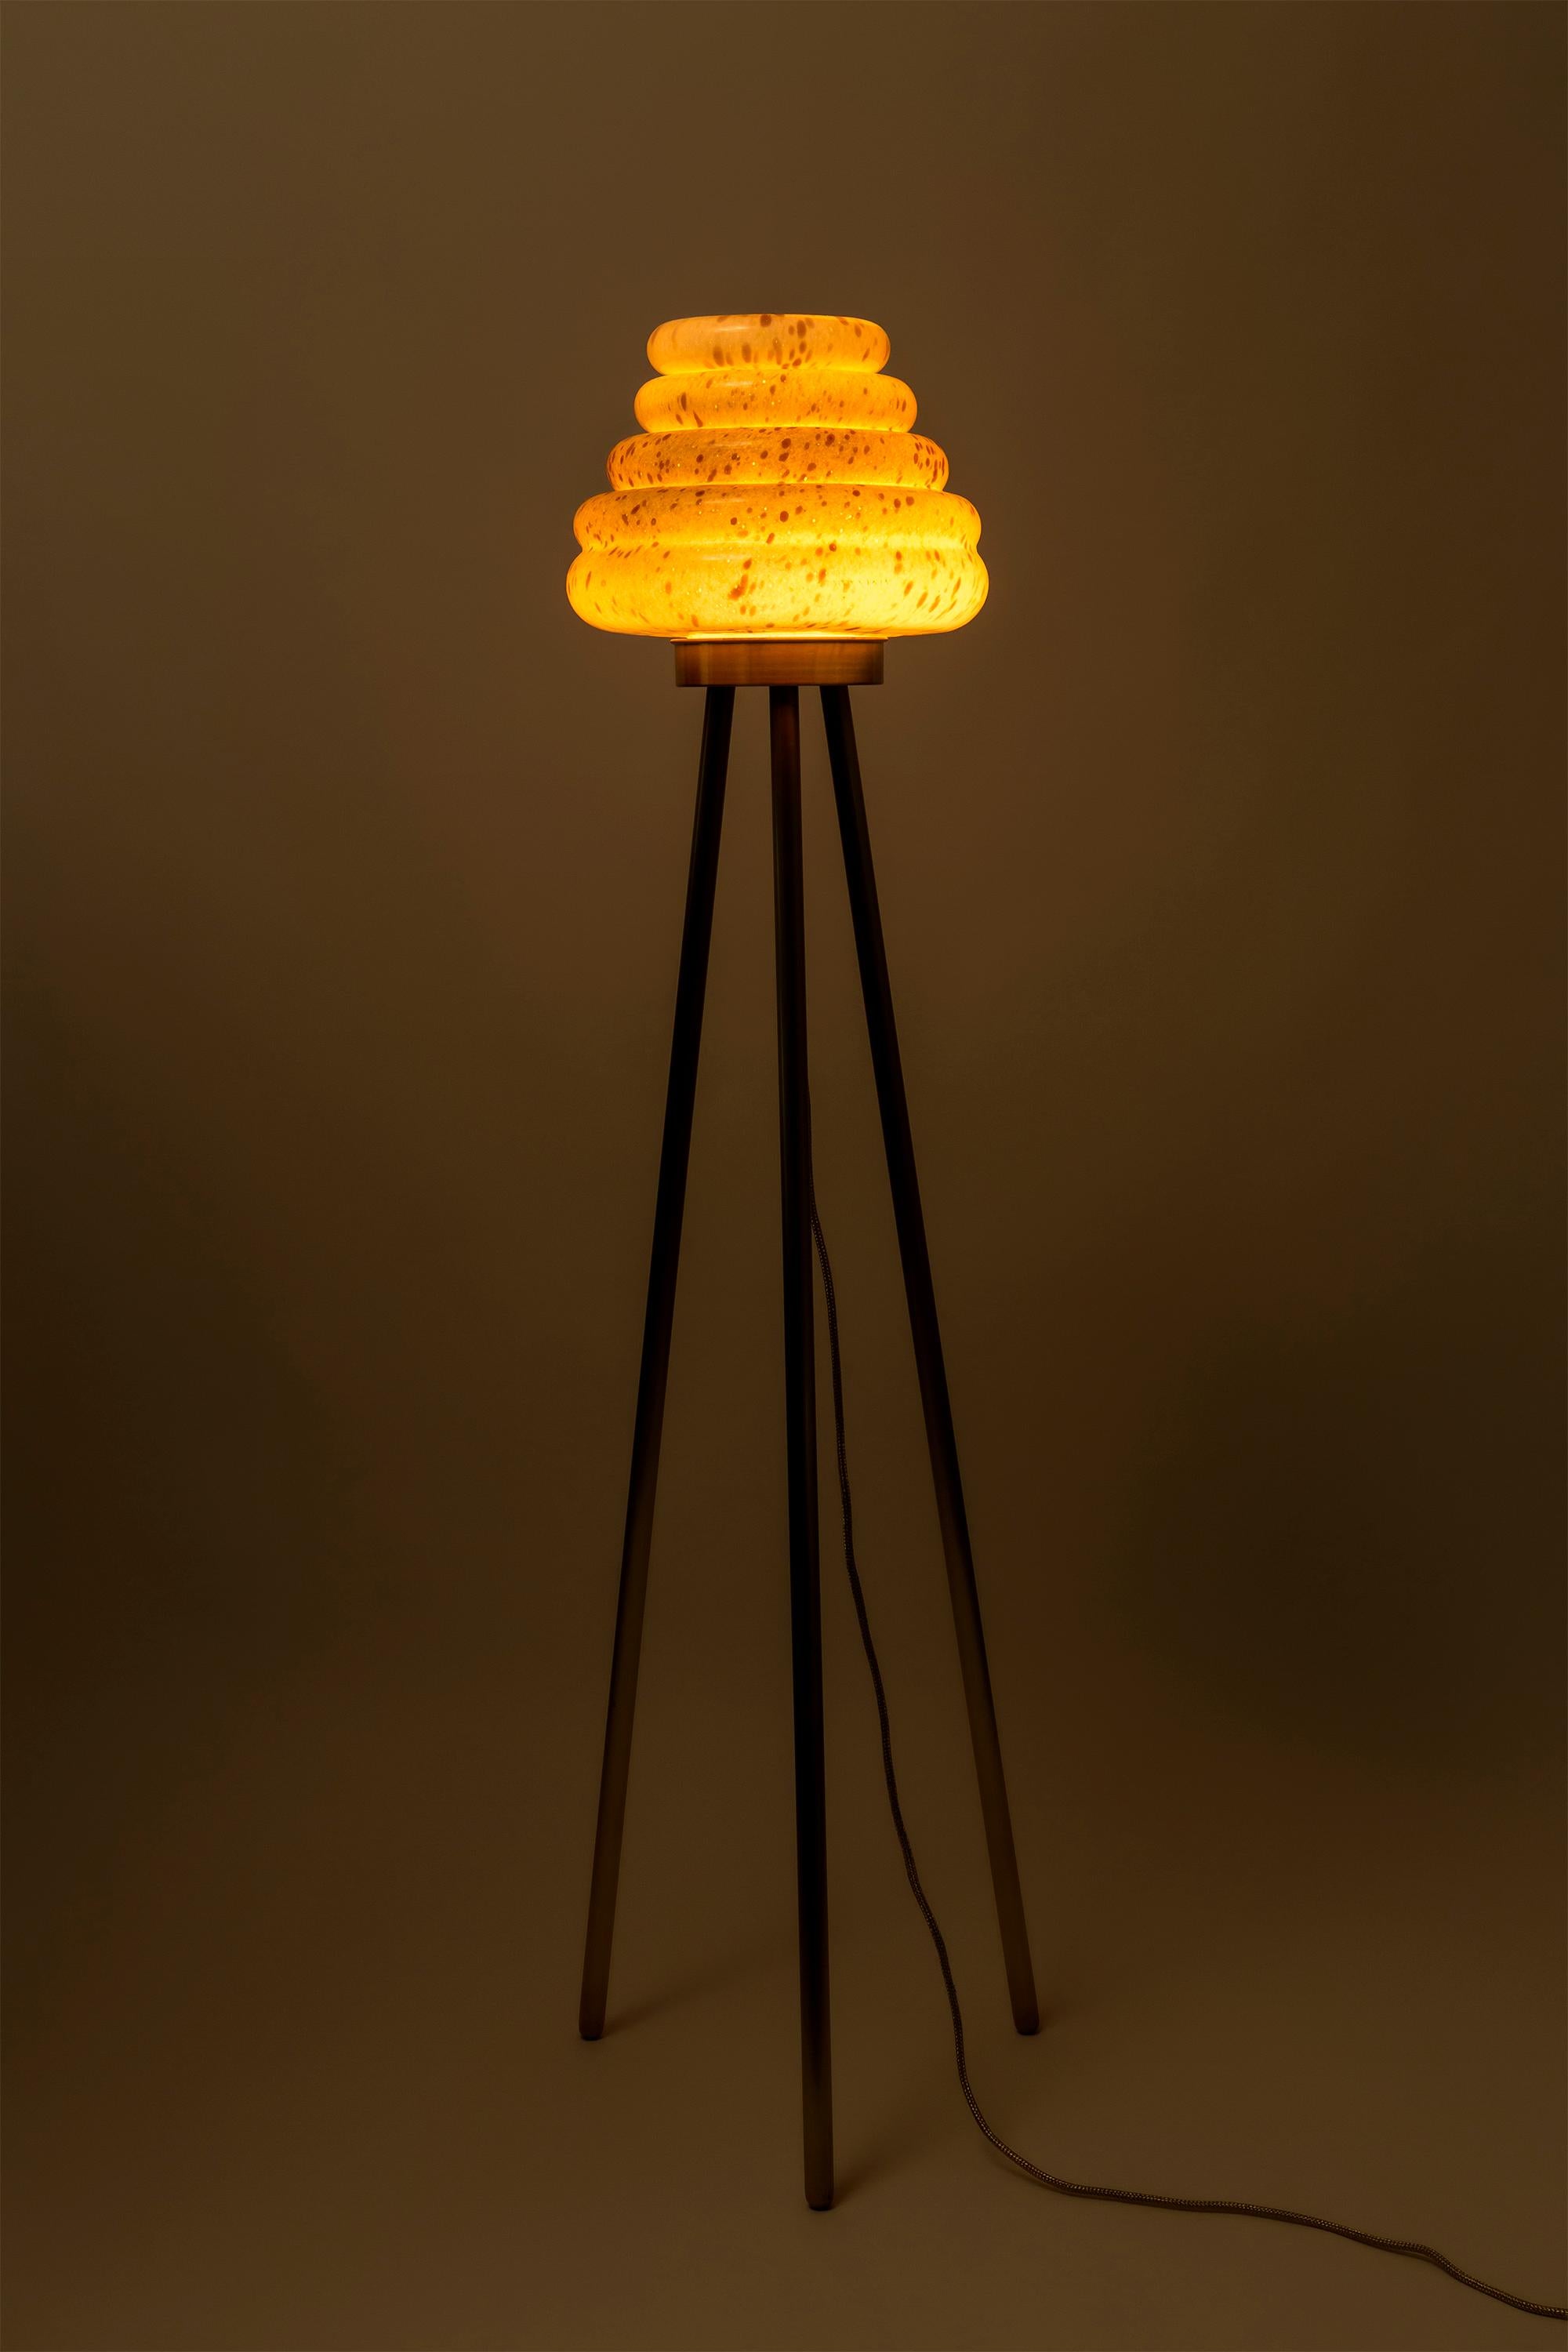 This beehive inspired floor lamp comprises a mixed colored hand-blown glass shade and different combinations of wood veneer legs and copper. Second version of Colmena has the dotted patterned glass shade and matte brass legs. The light is adjustable